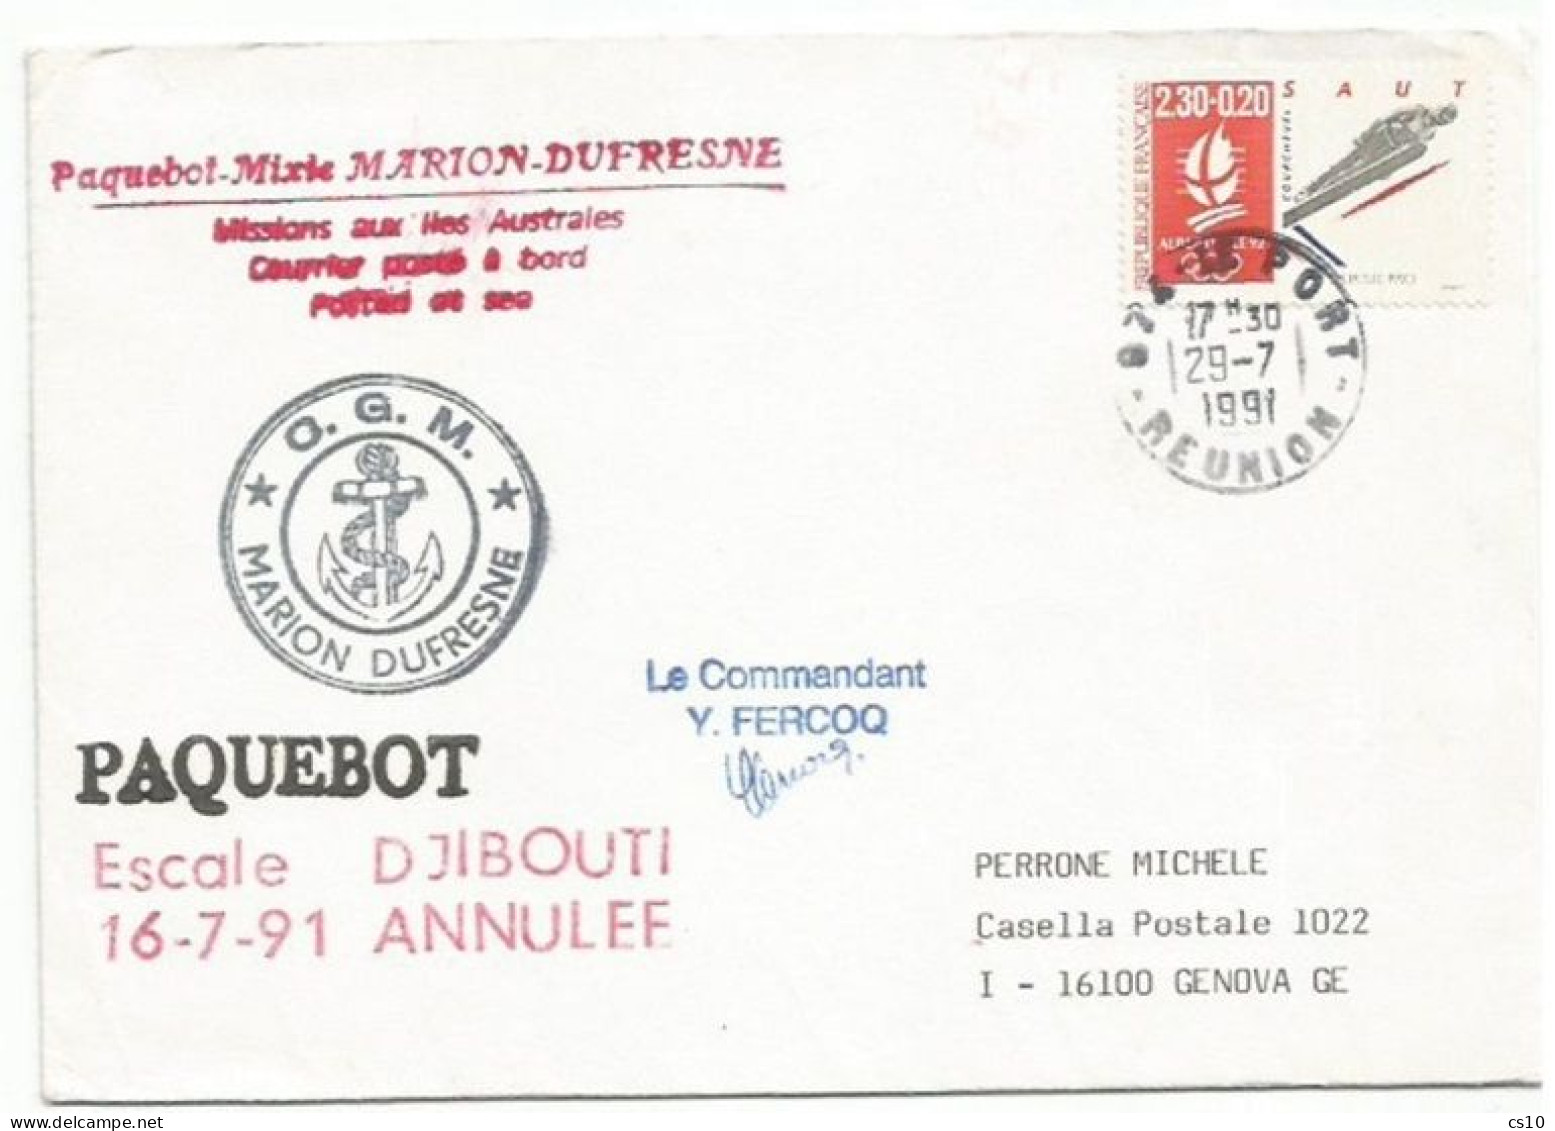 Antarctica South Pole Islands France PAQUEBOT Marion Dufresne Stage In Djibouti 16jul91 + Reunion 29jul91 - Polar Ships & Icebreakers